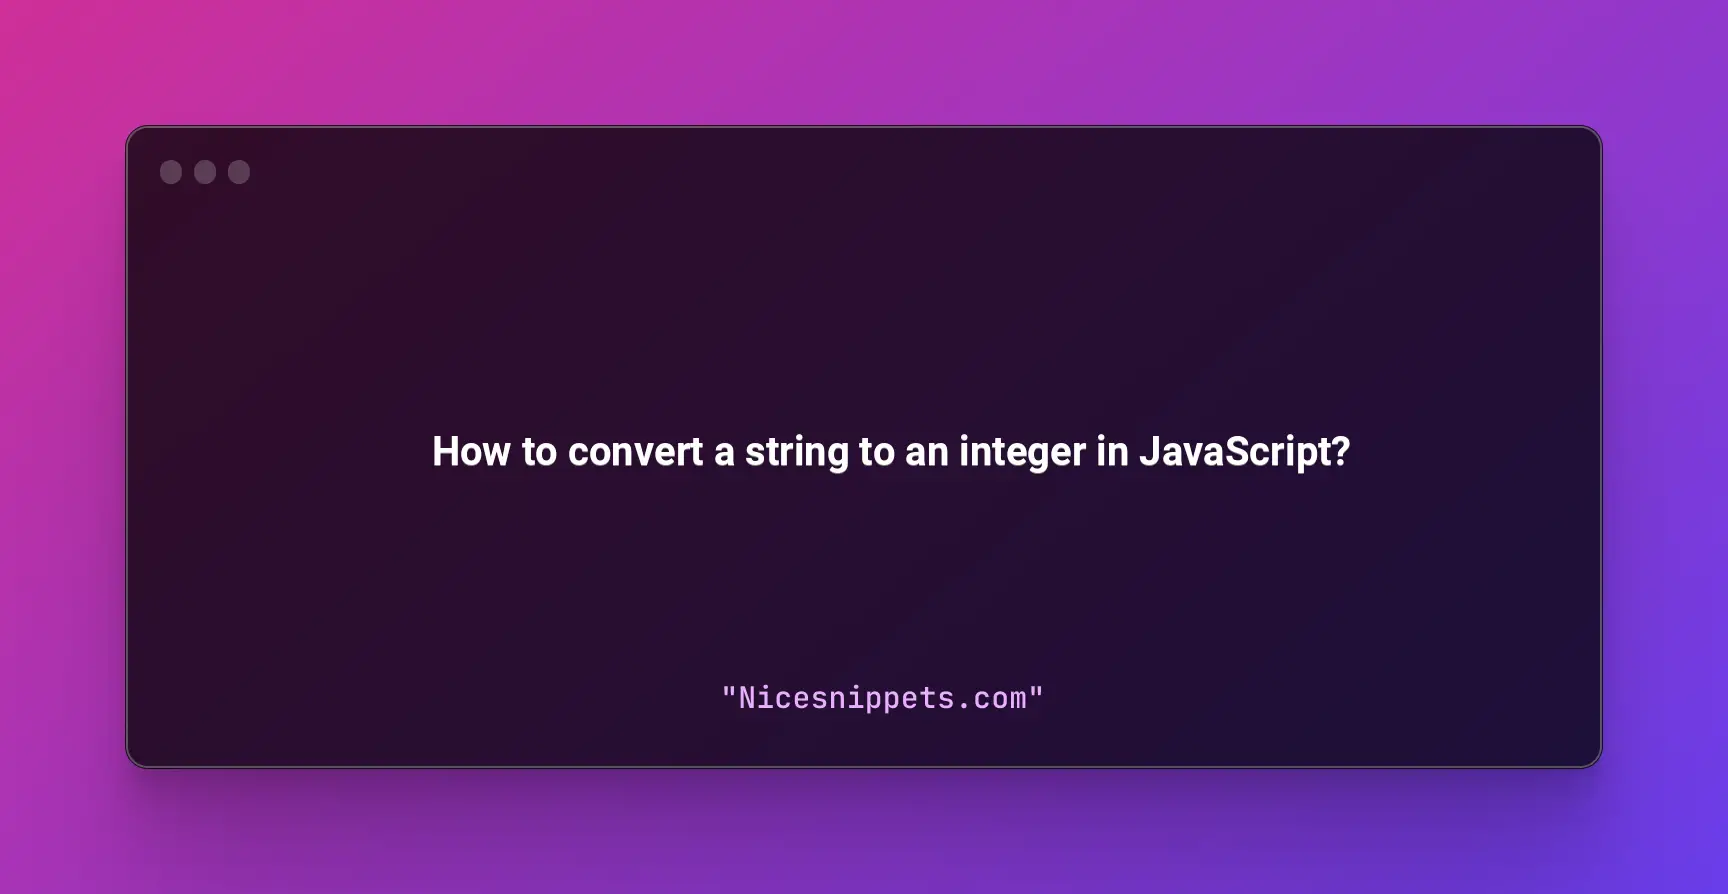 How to convert a string to an integer in JavaScript?